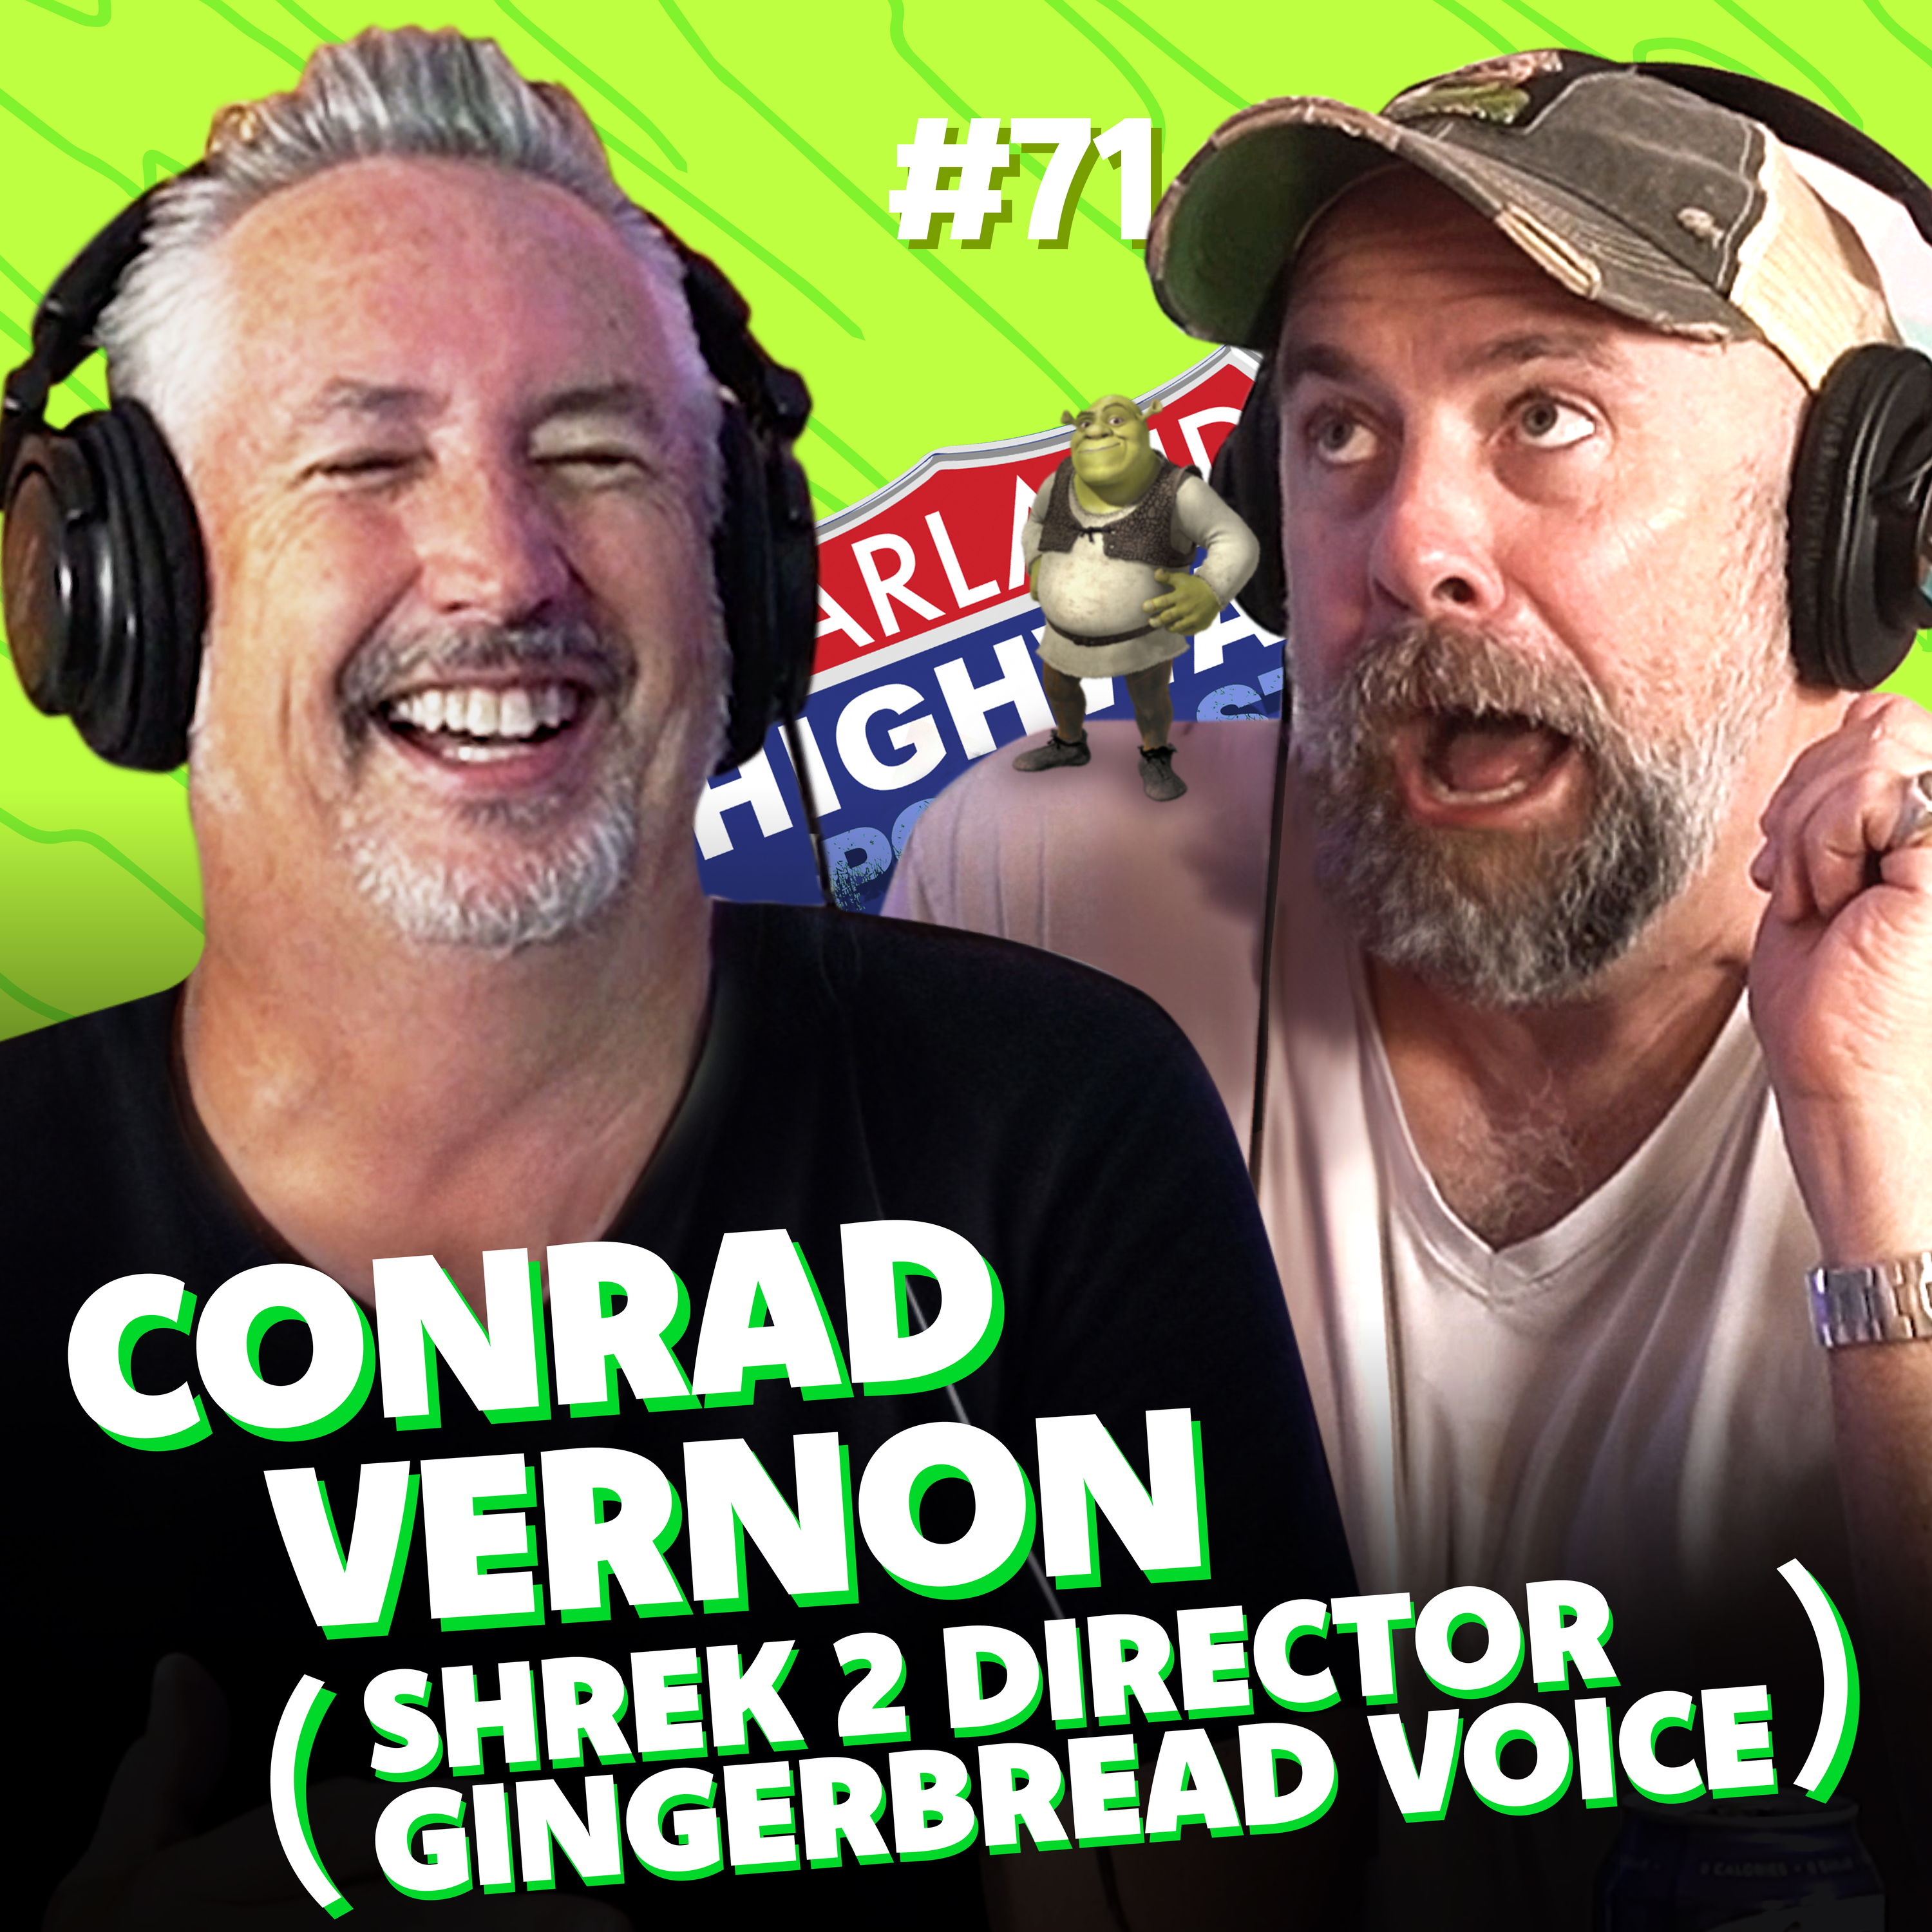 NEW HARLAND HIGHWAY #71 - CONRAD VERNON, animation director of Shrek 2, Sausage Party, and so much more!